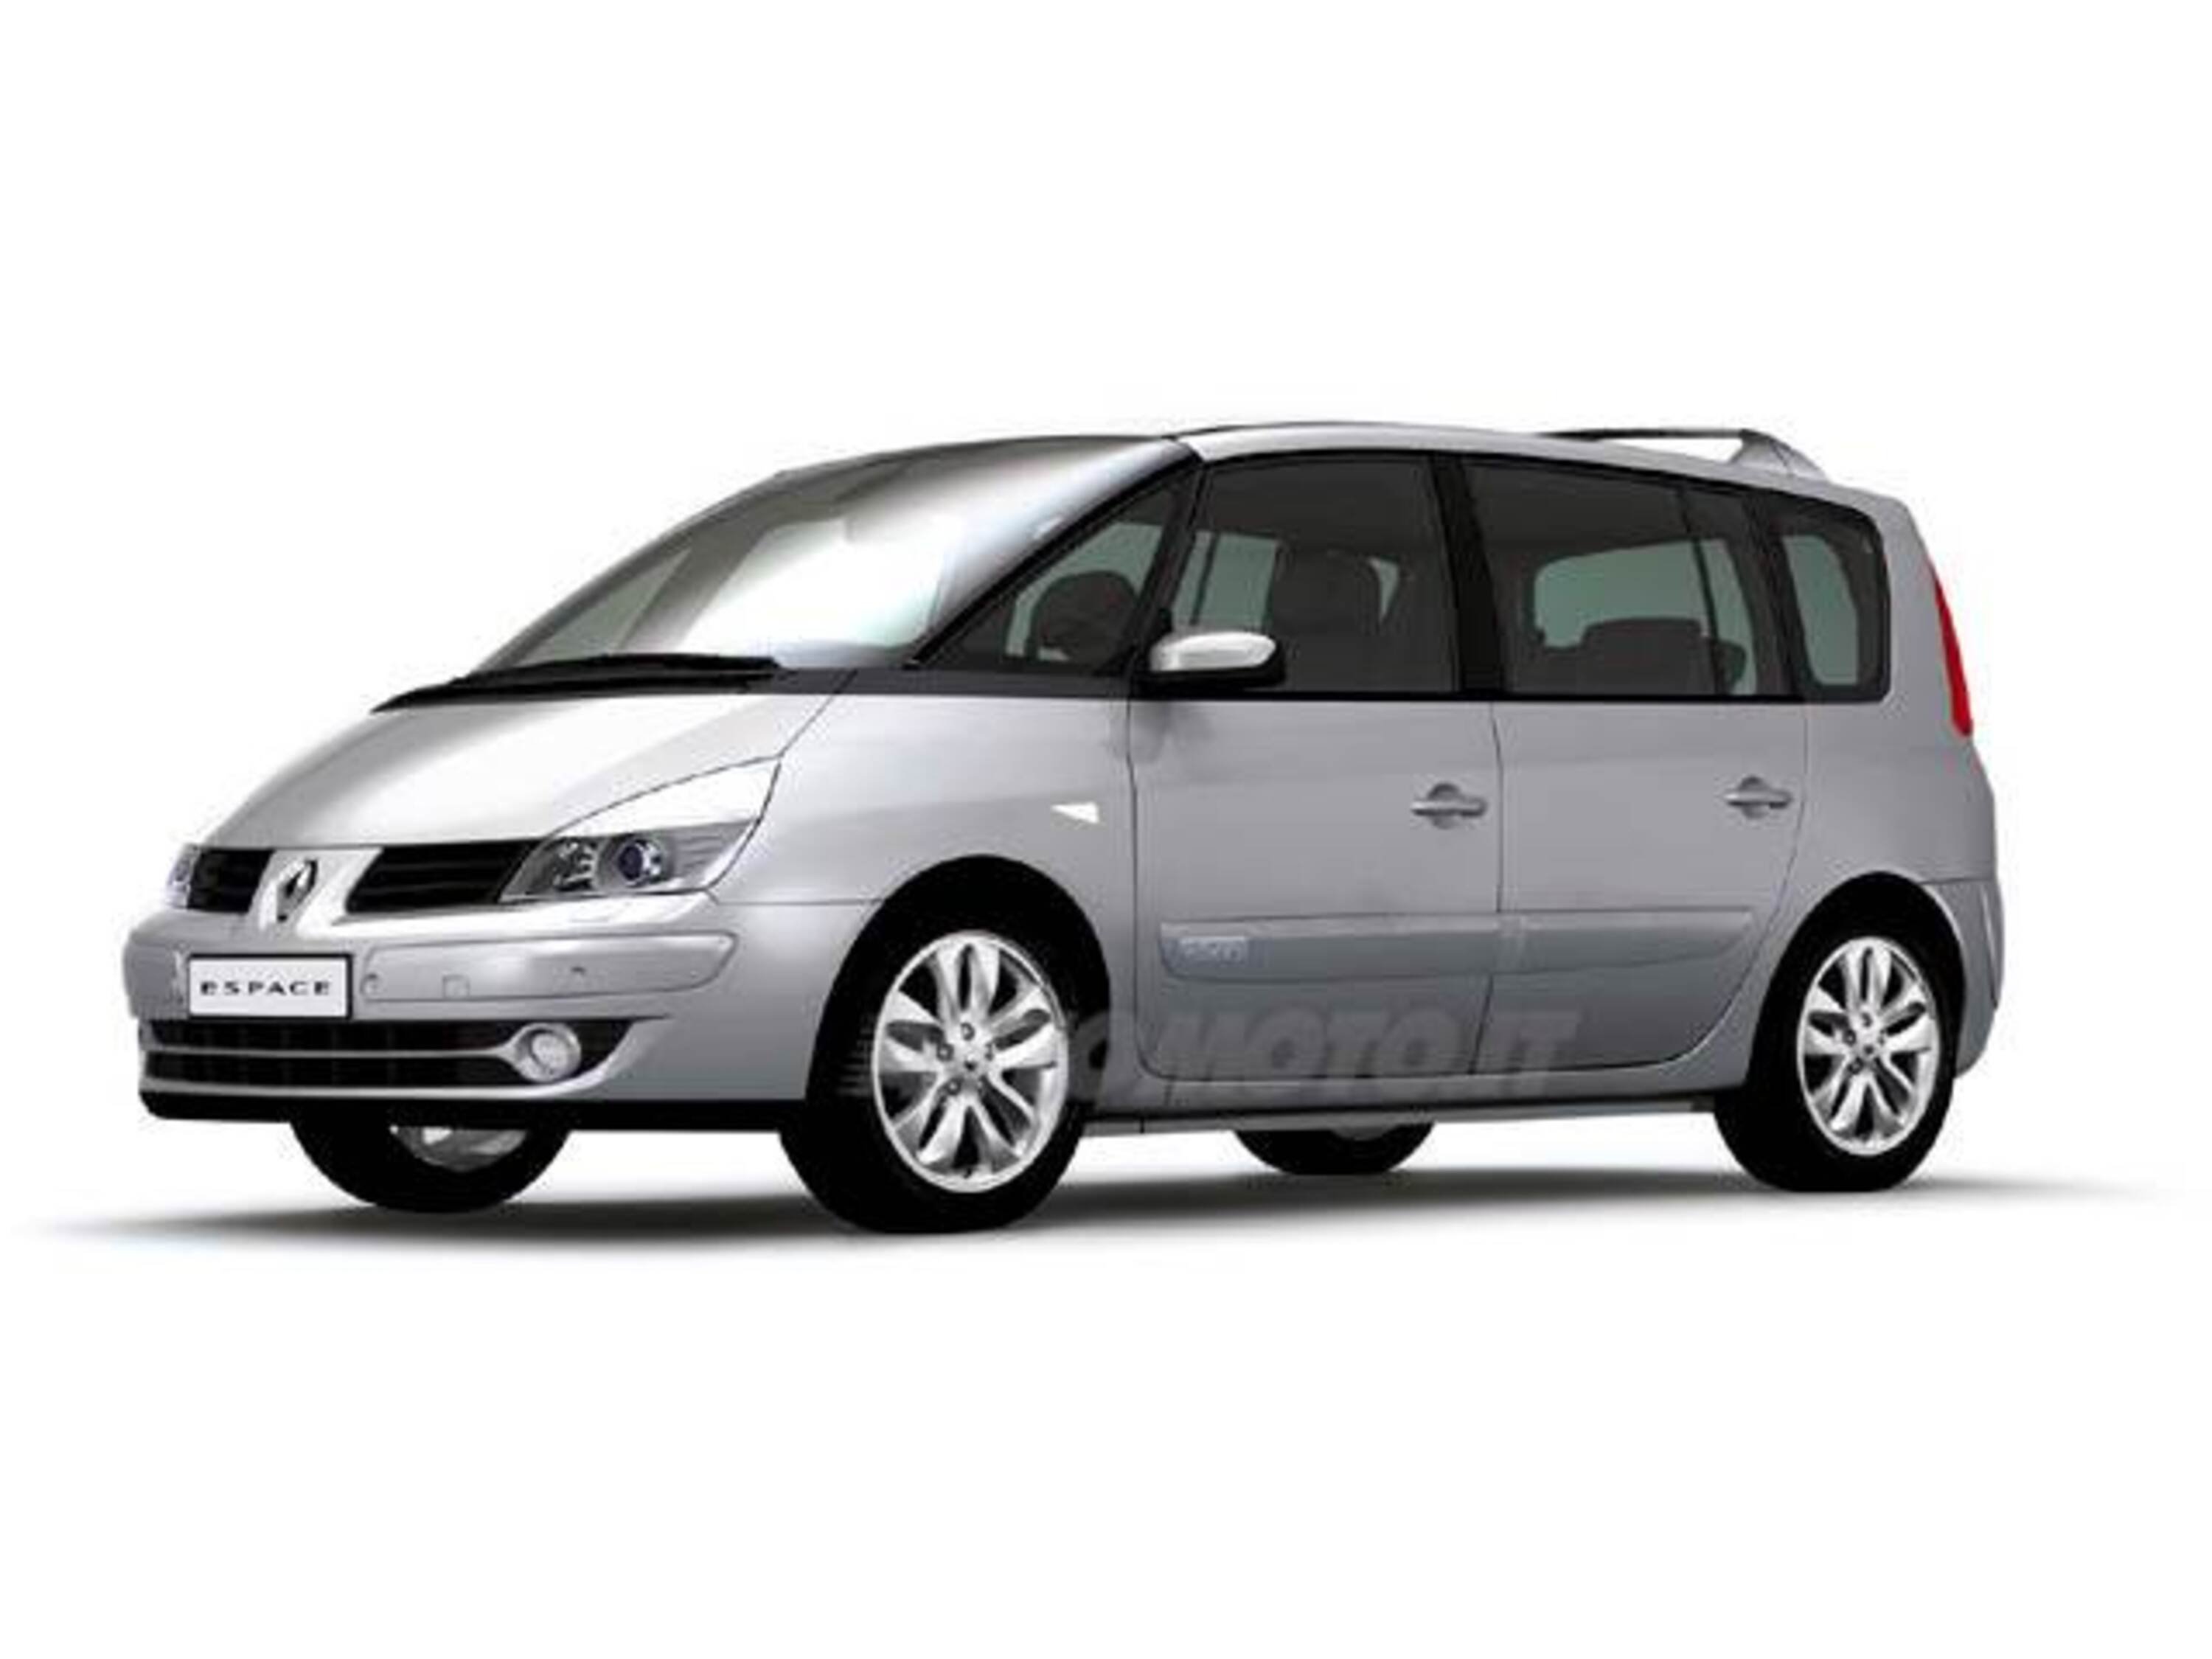 Renault Espace 3.0 V6 24V dCi Proactive Initiale